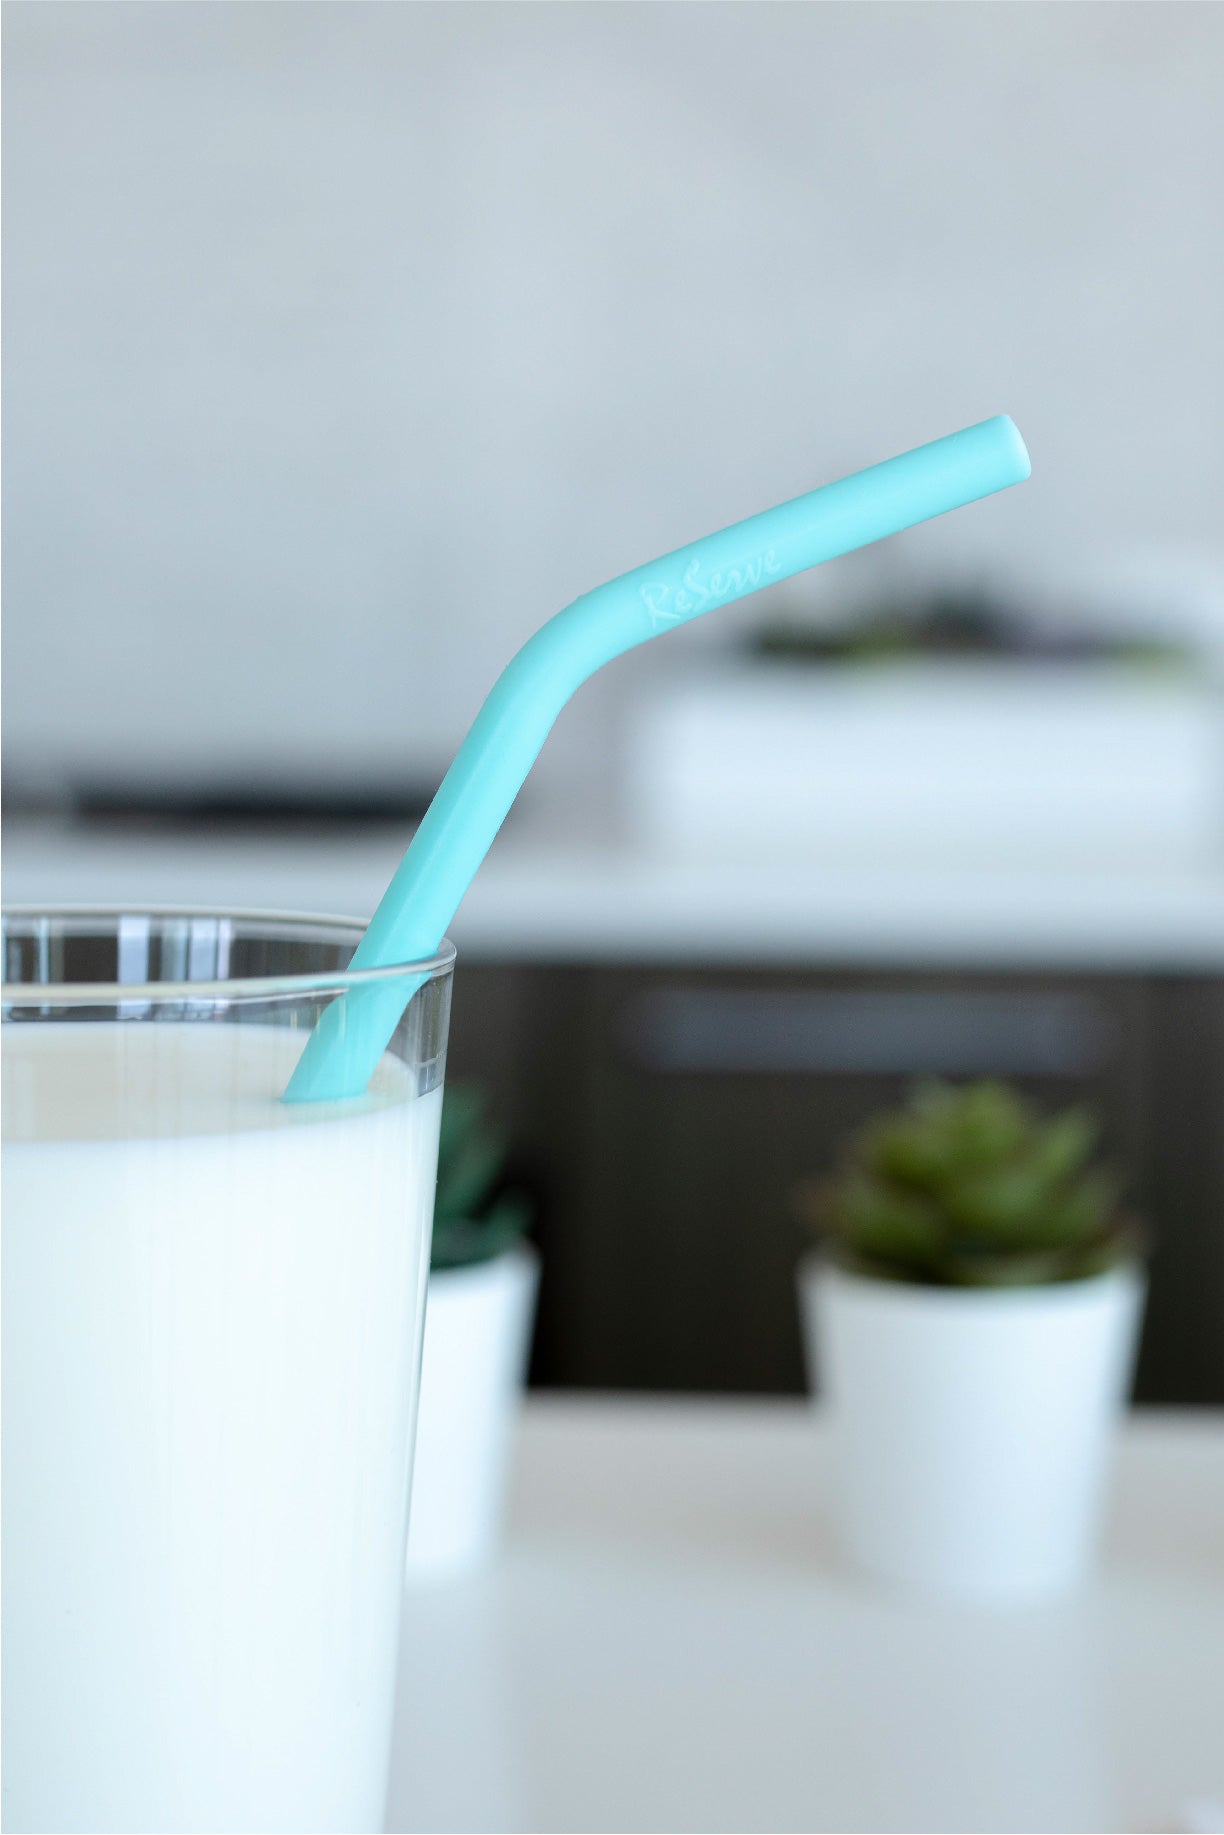 Blue Island Paradise Silicone Straw closed up in a glass of milk